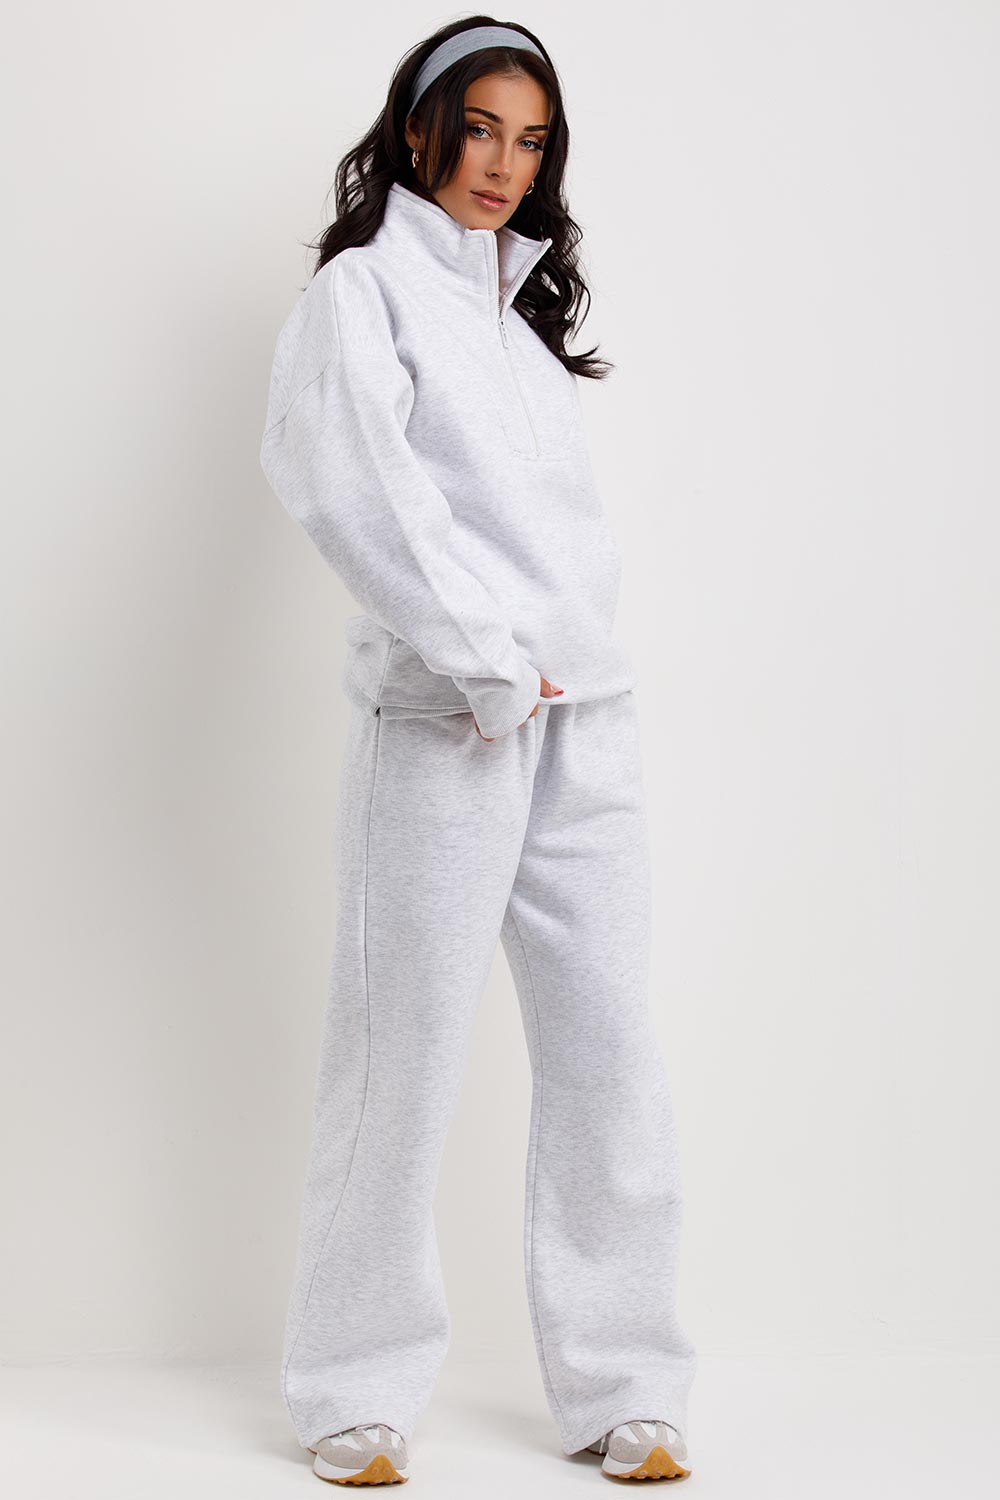 womens straight leg joggers and half zip sweatshirt tracksuit airport outfit